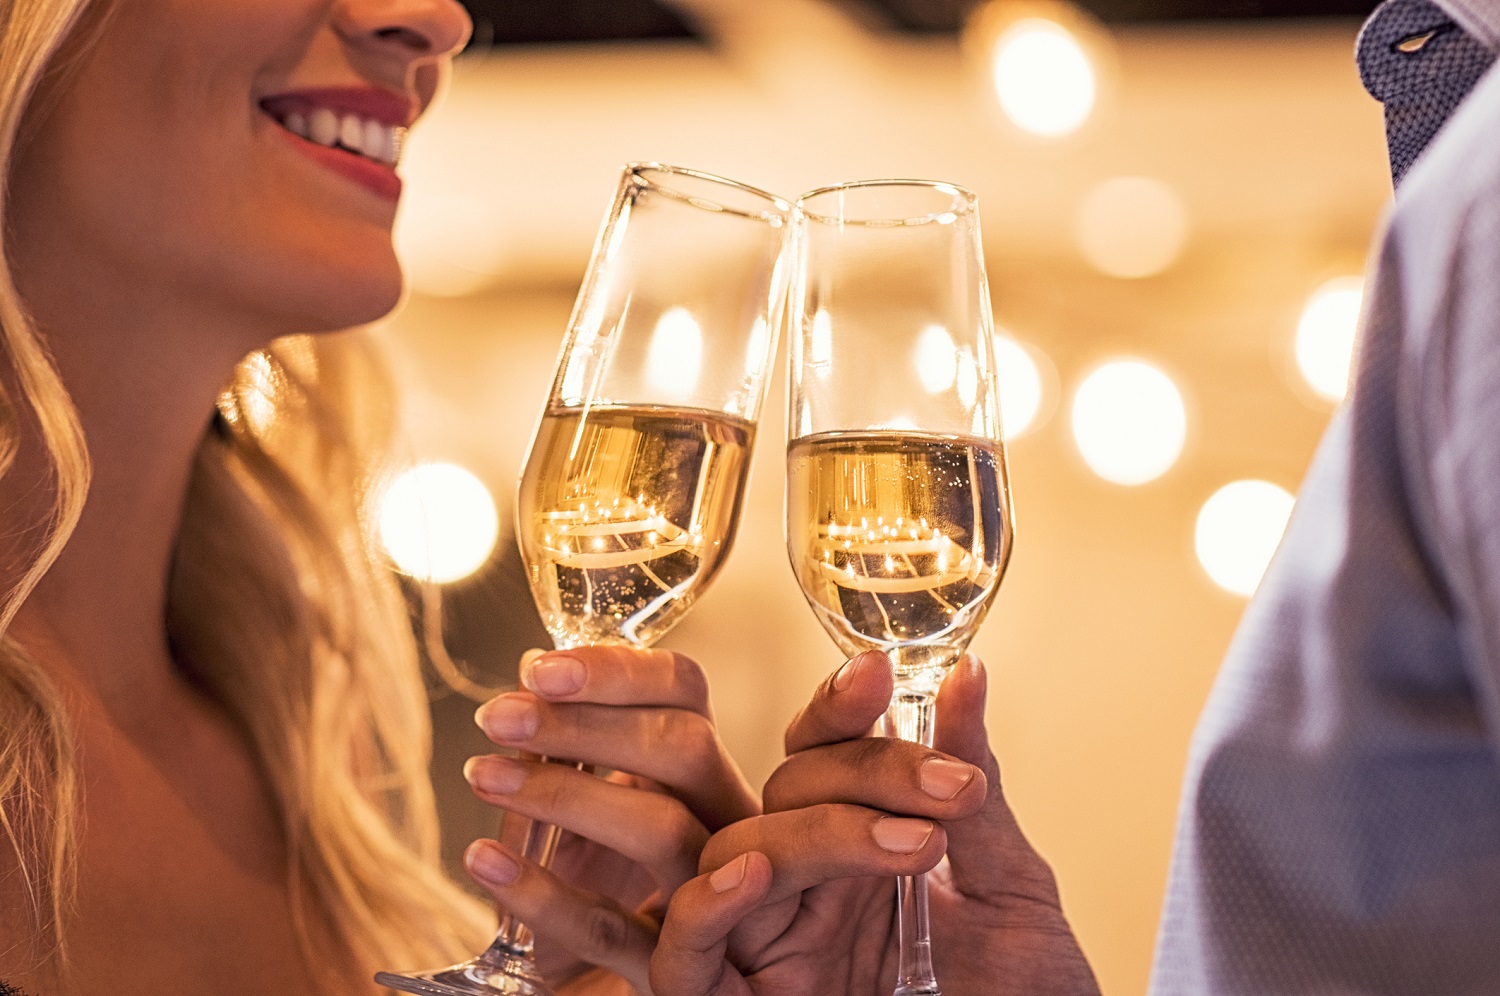 Man and woman toasting champagne flutes under light bulb outdoor. Closeup of boyfriend and girlfriend hands toasting glasses of white wine to celebrate their anniversary. Detail of party celebration.